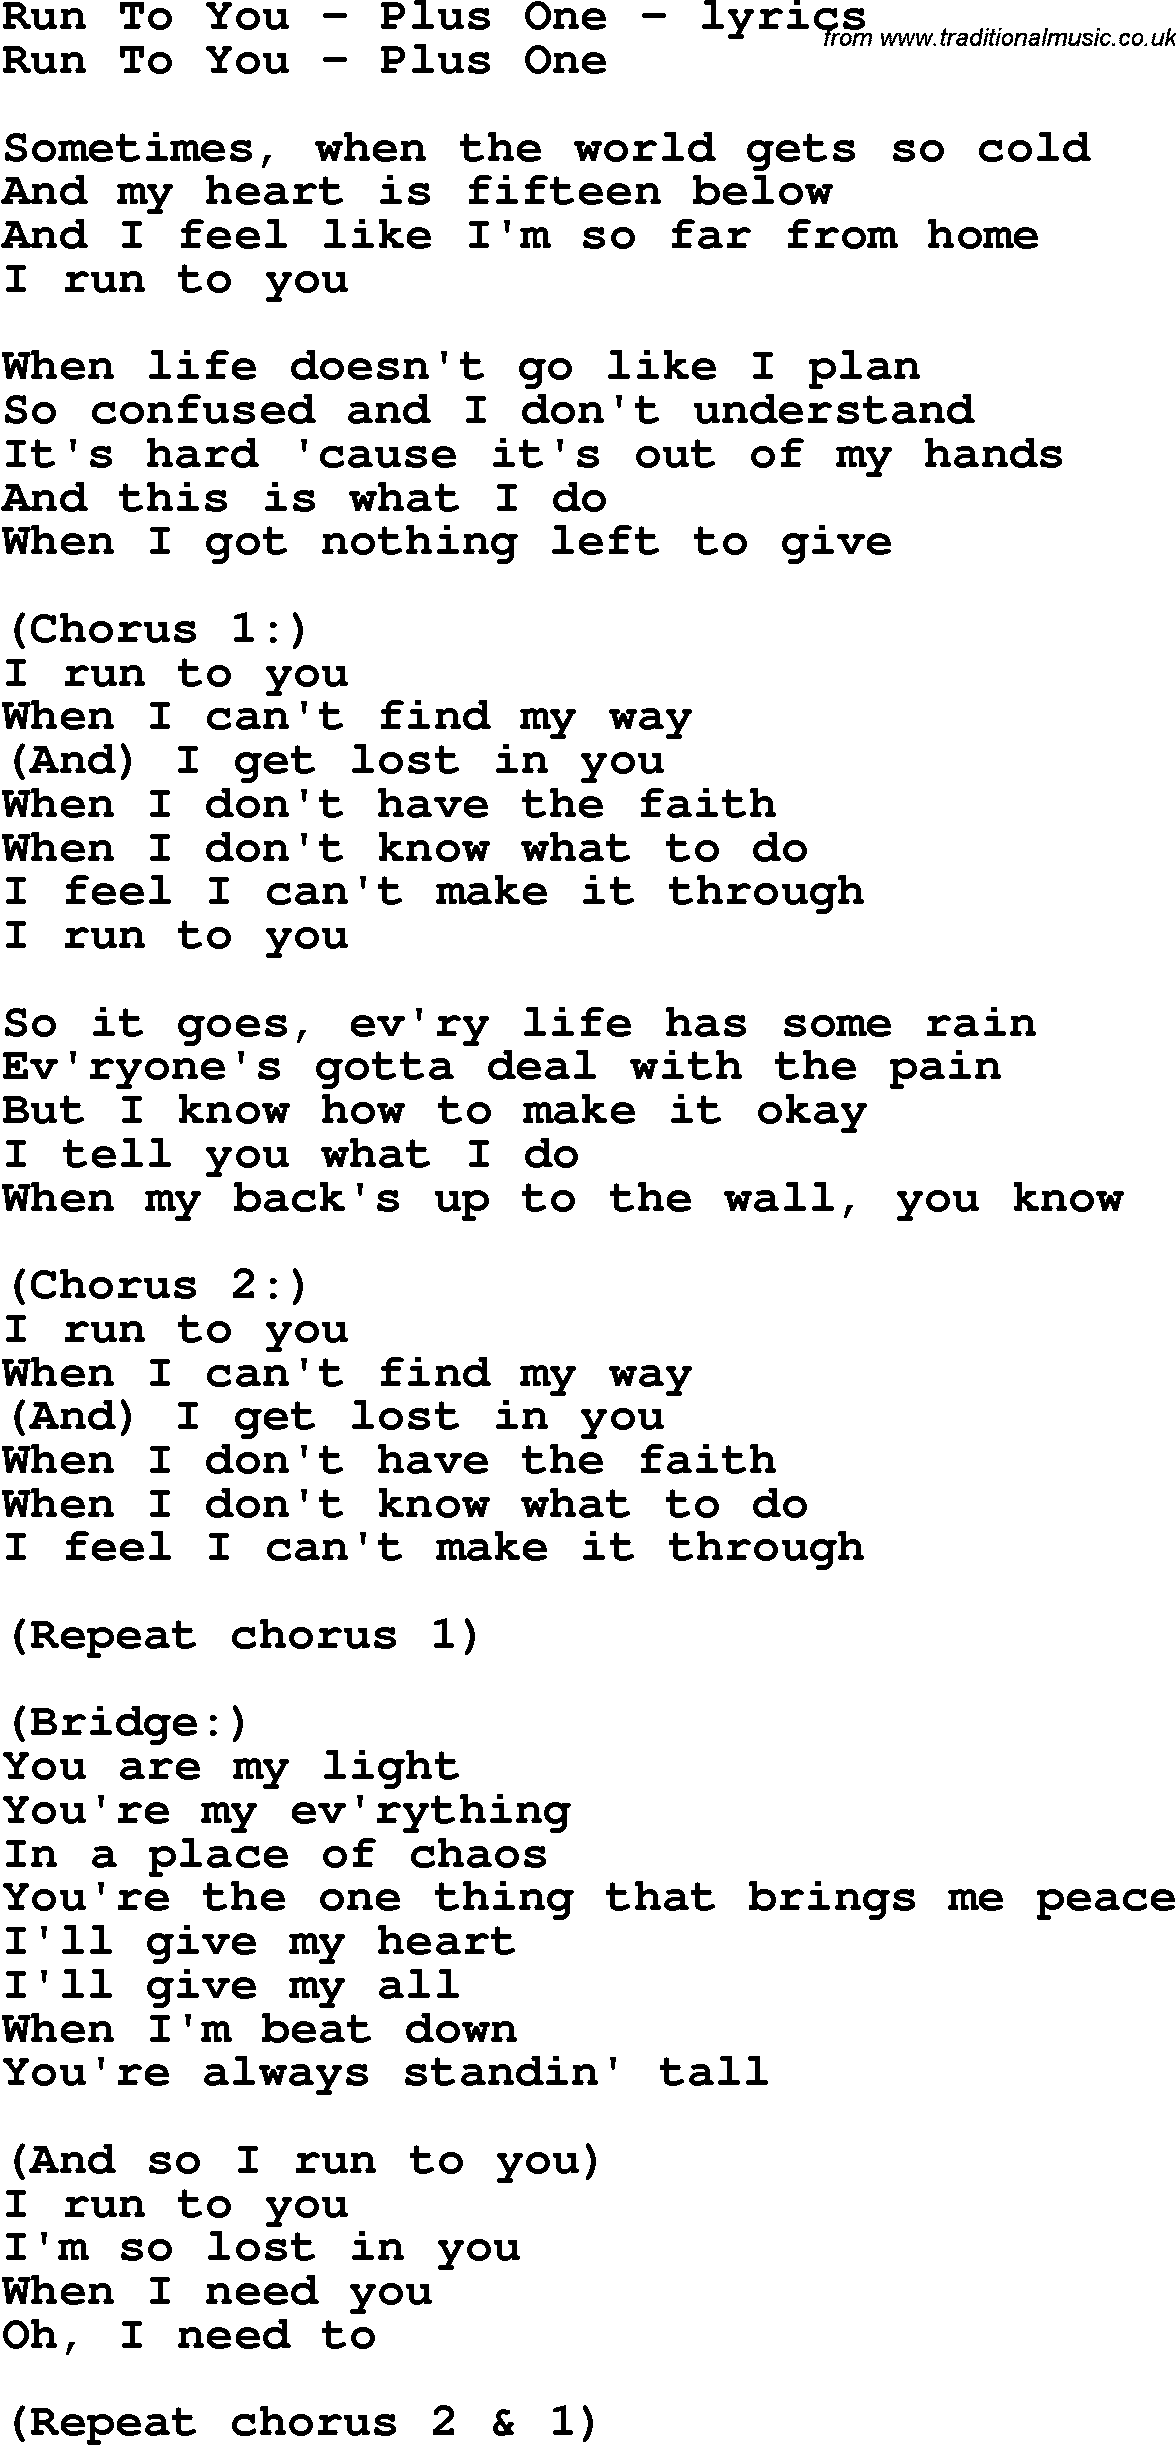 Love Song Lyrics for: Run To You - Plus One